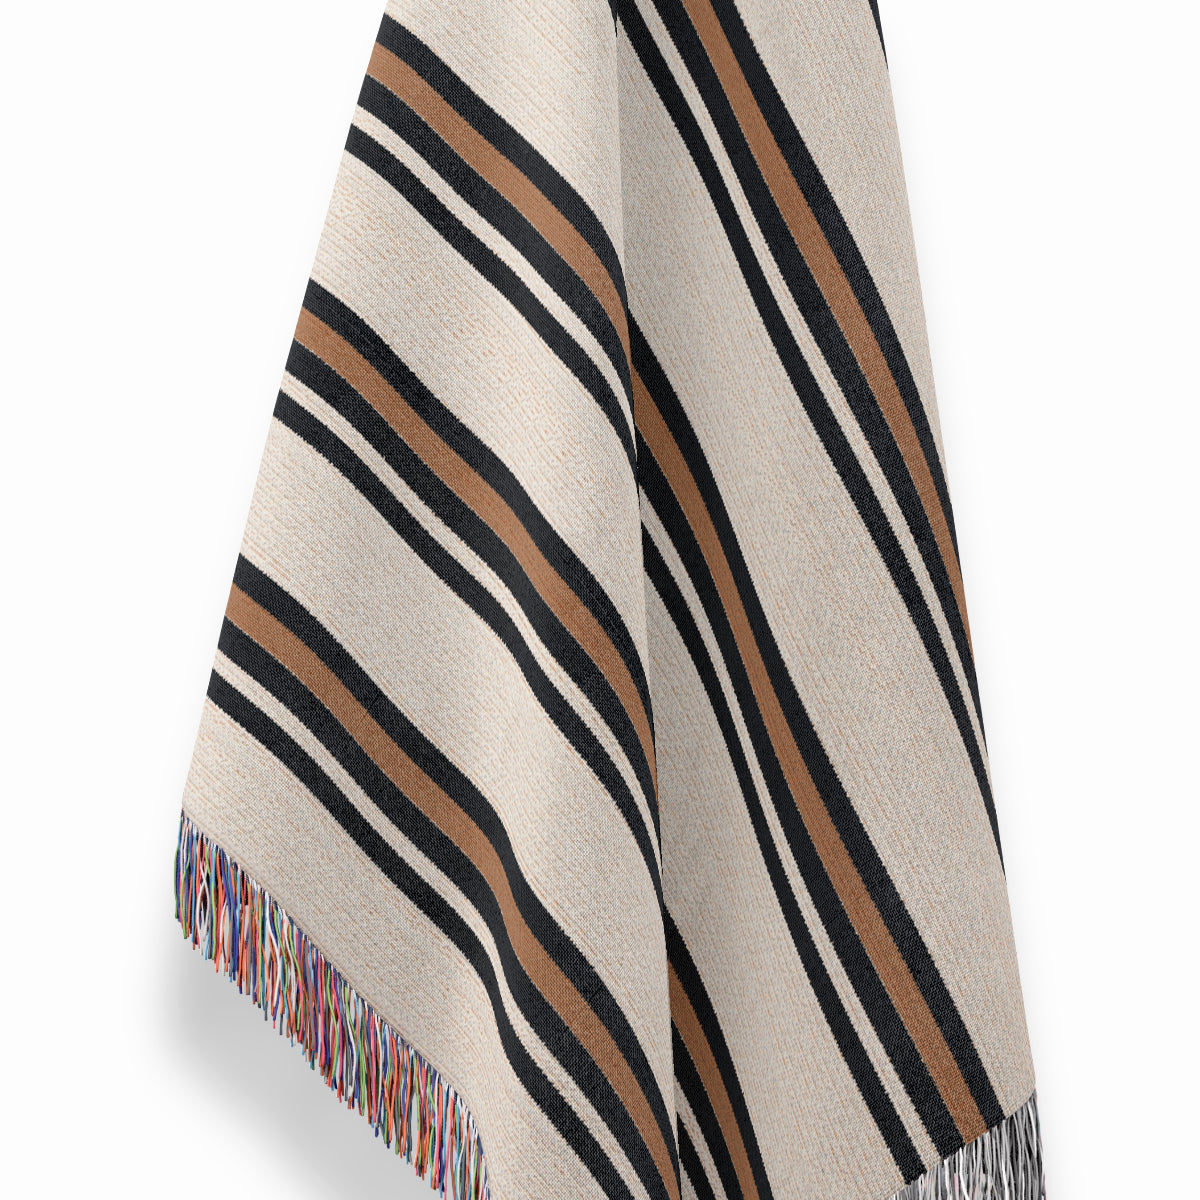 Striped Natural Colors- Woven Blankets